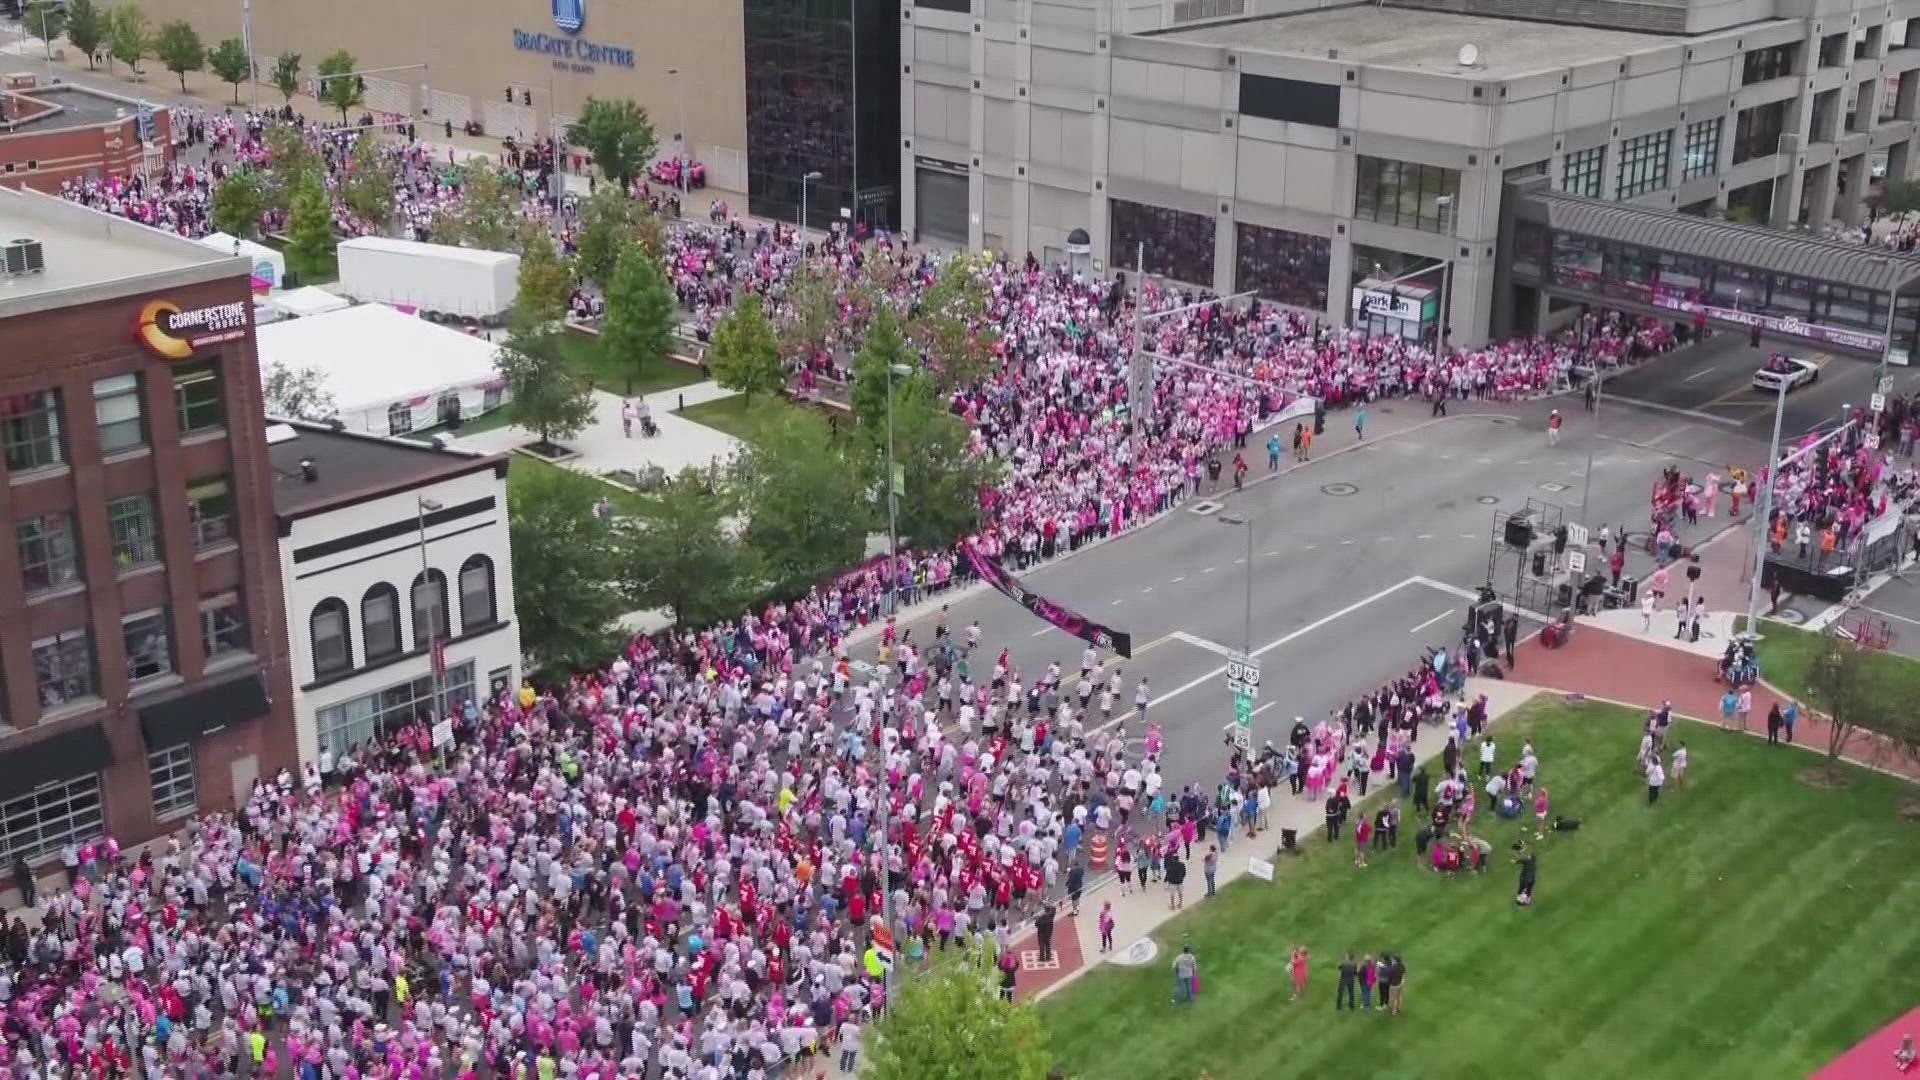 The Susan G. Komen Races for the Cure is held every year to raise money in the fight against breast cancer, a disease affecting hundreds of thousands of people.